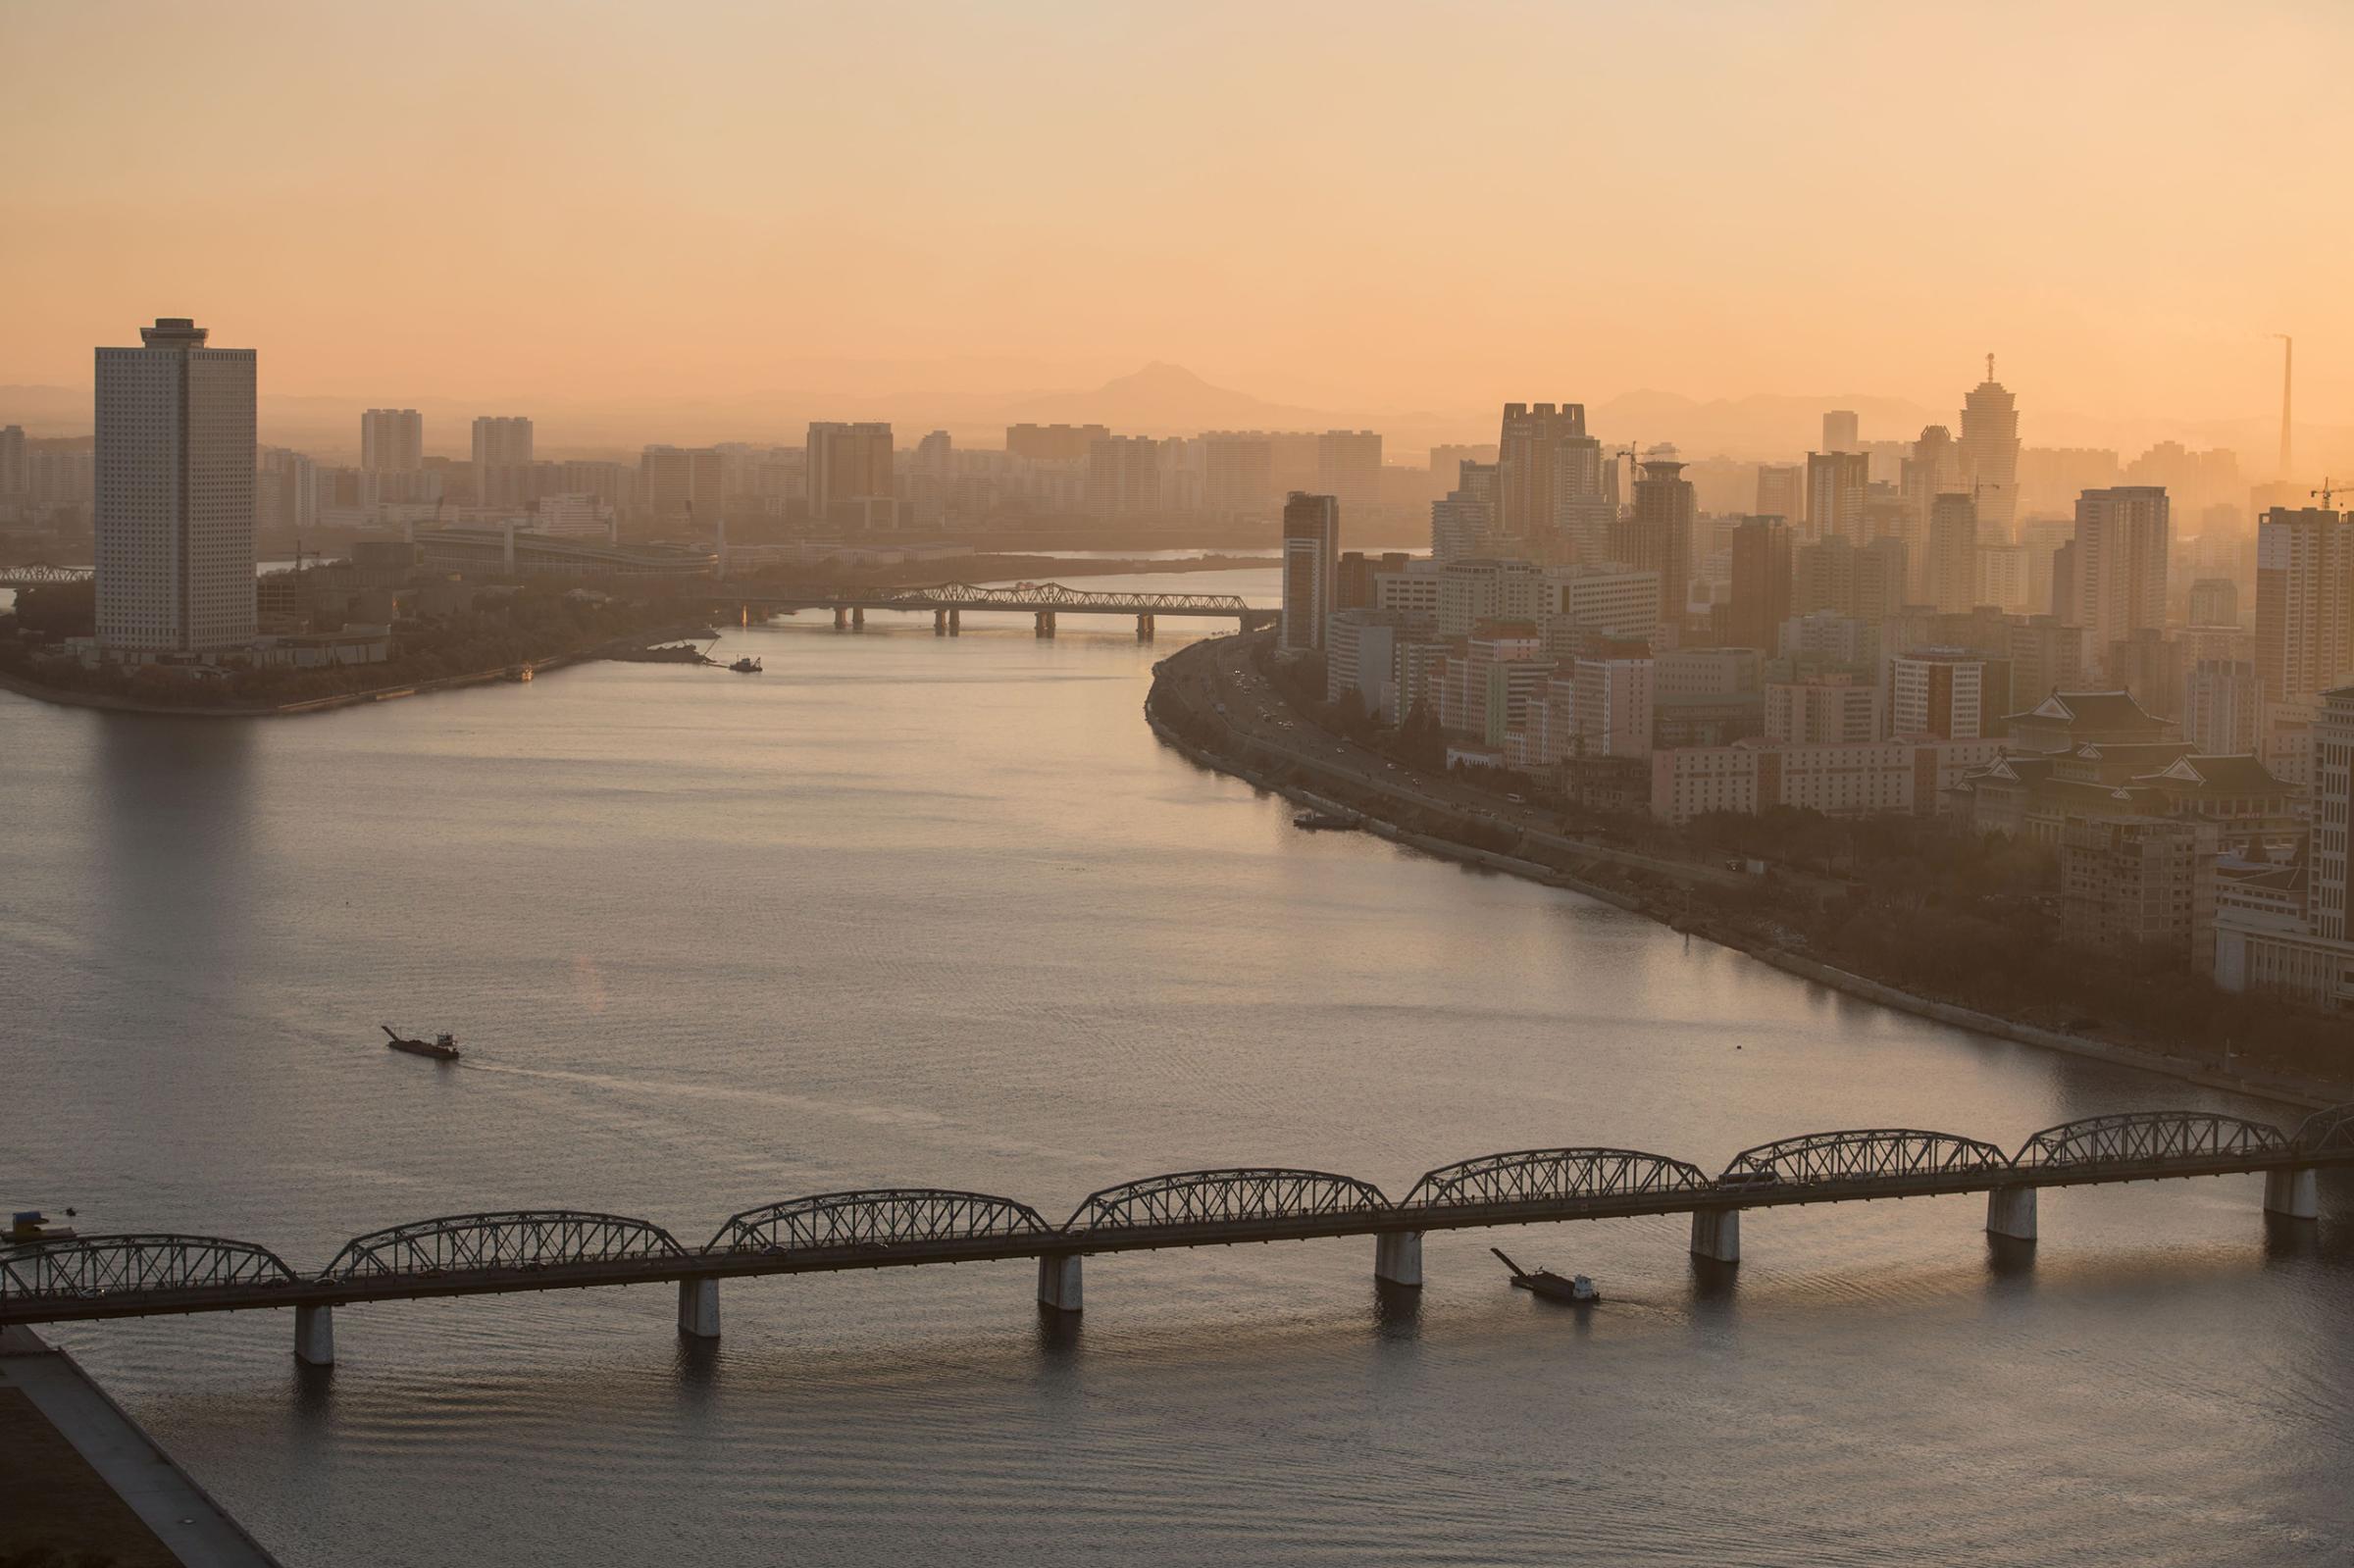 The Yanggakdo hotel, Taedong river and the Pyongyang city skyline on Nov. 28, 2016.